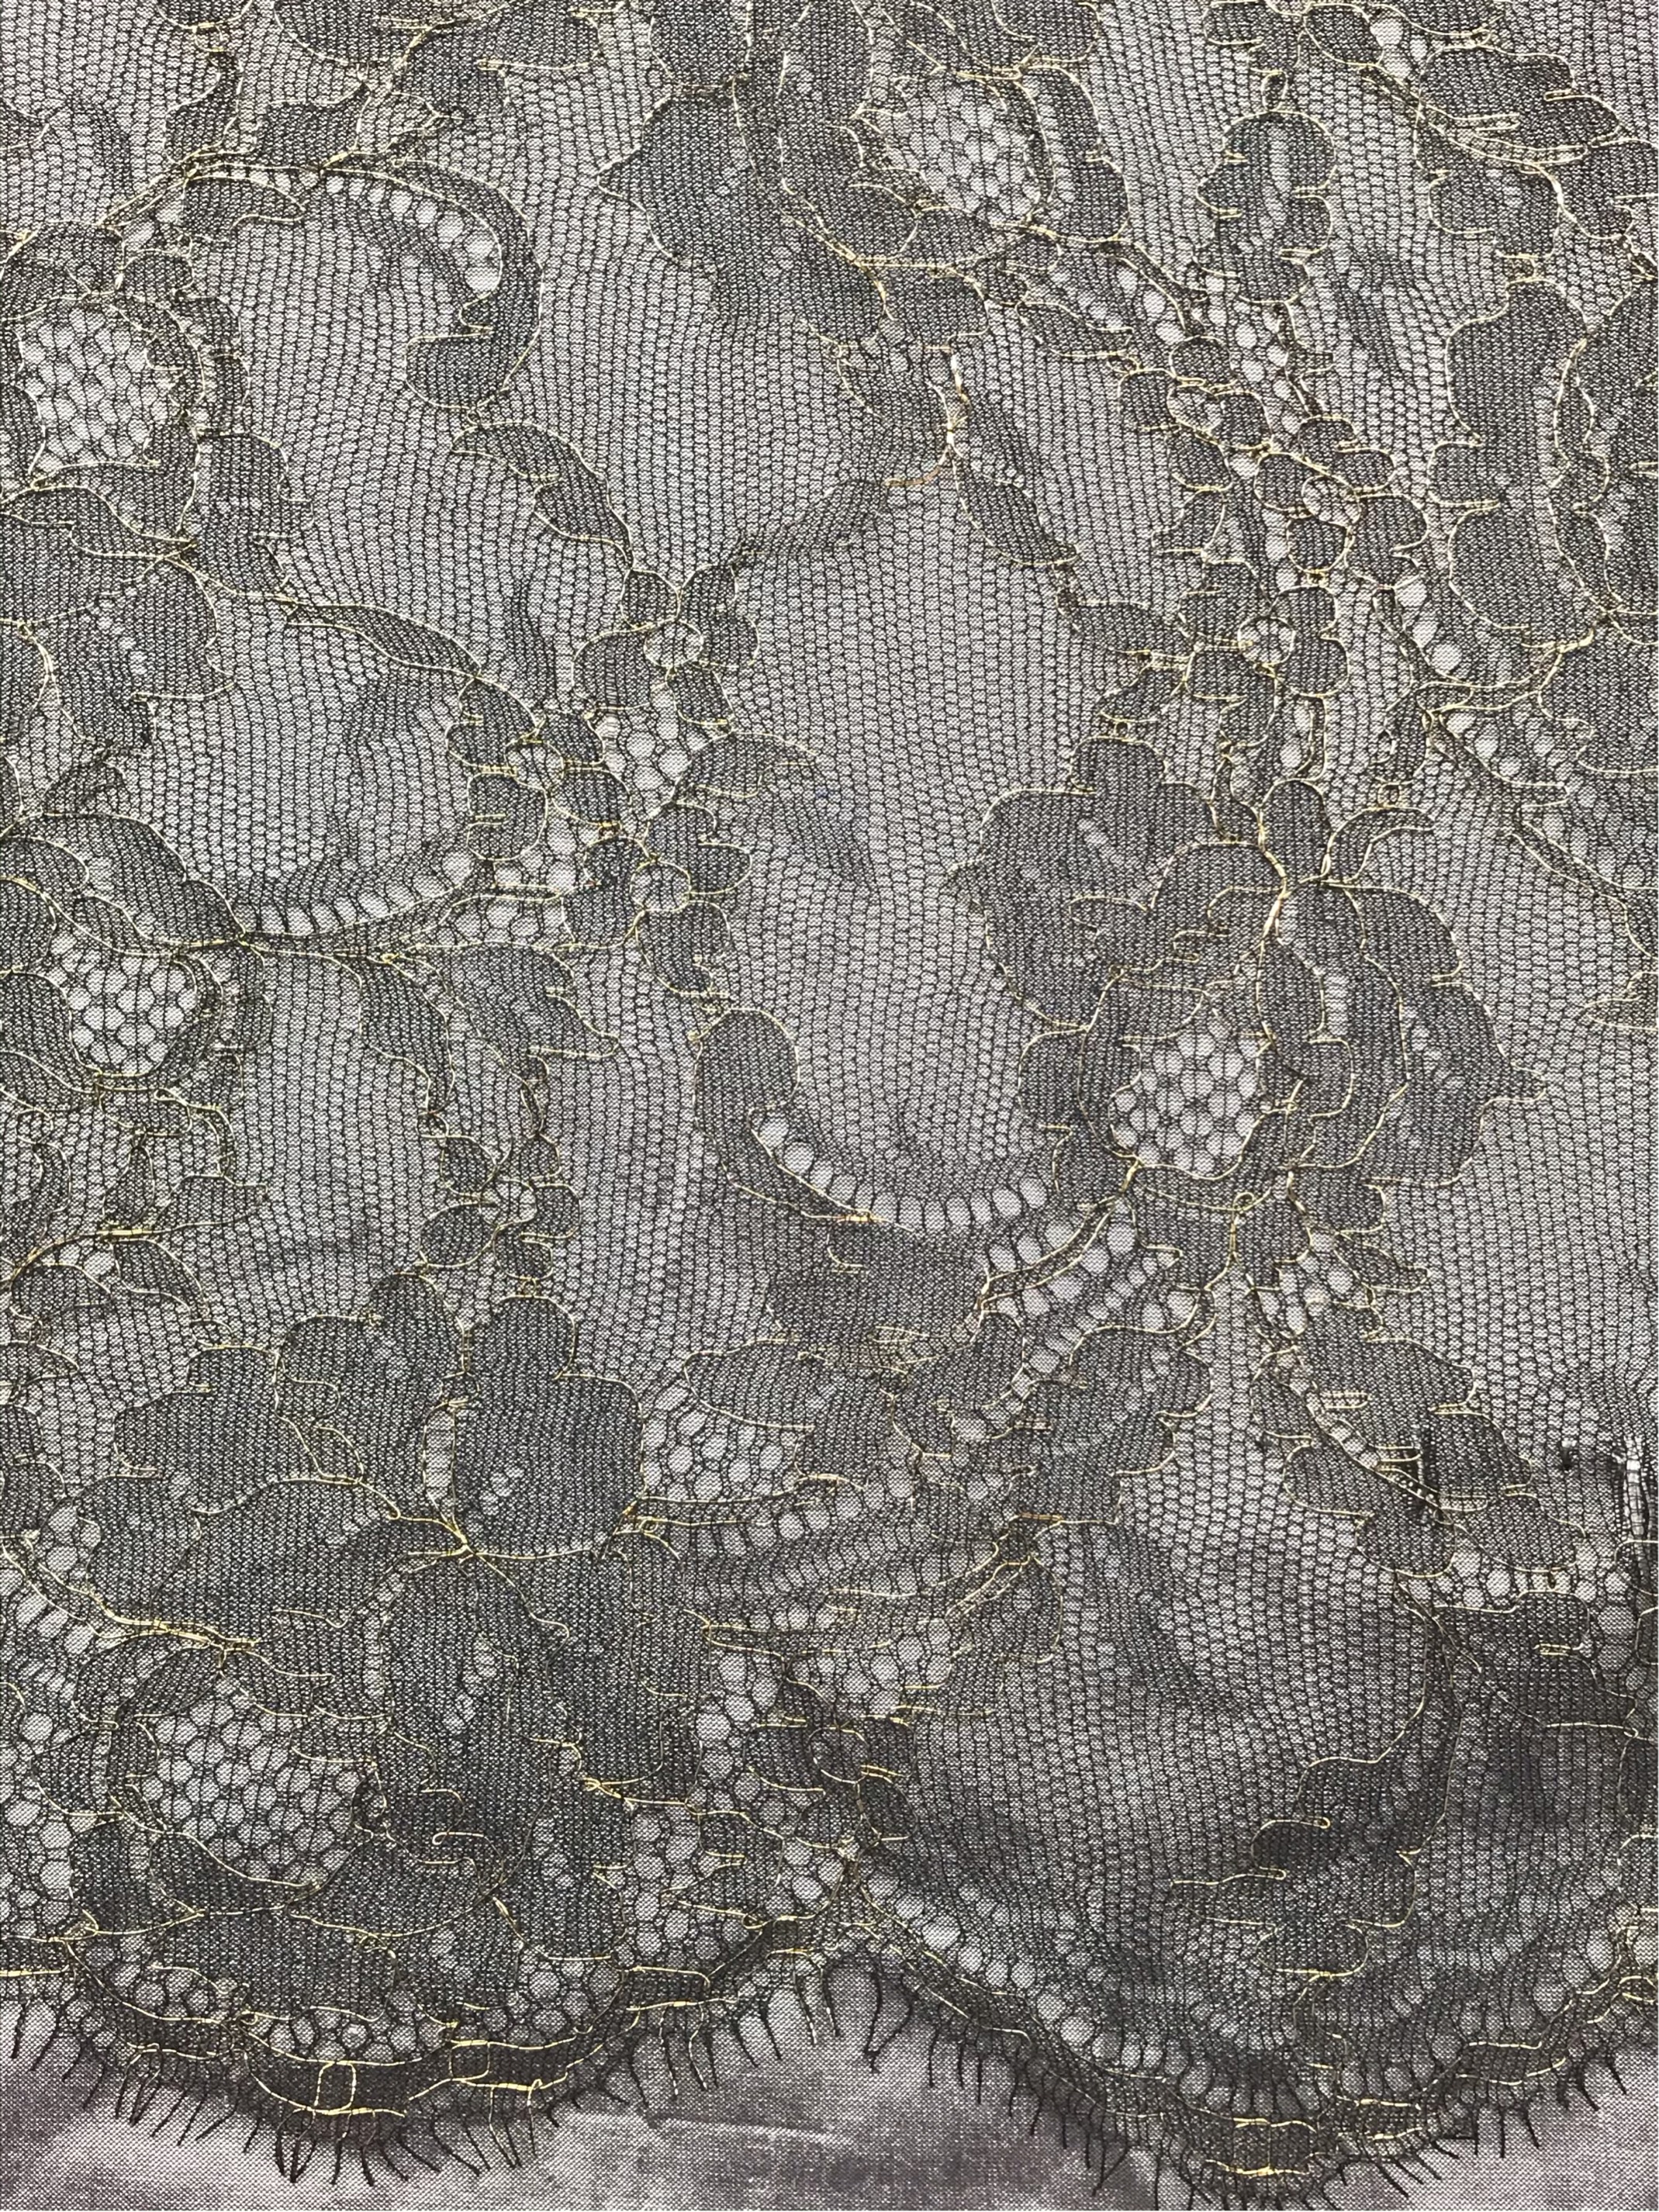 French Chantilly Lace - Hansson Silks